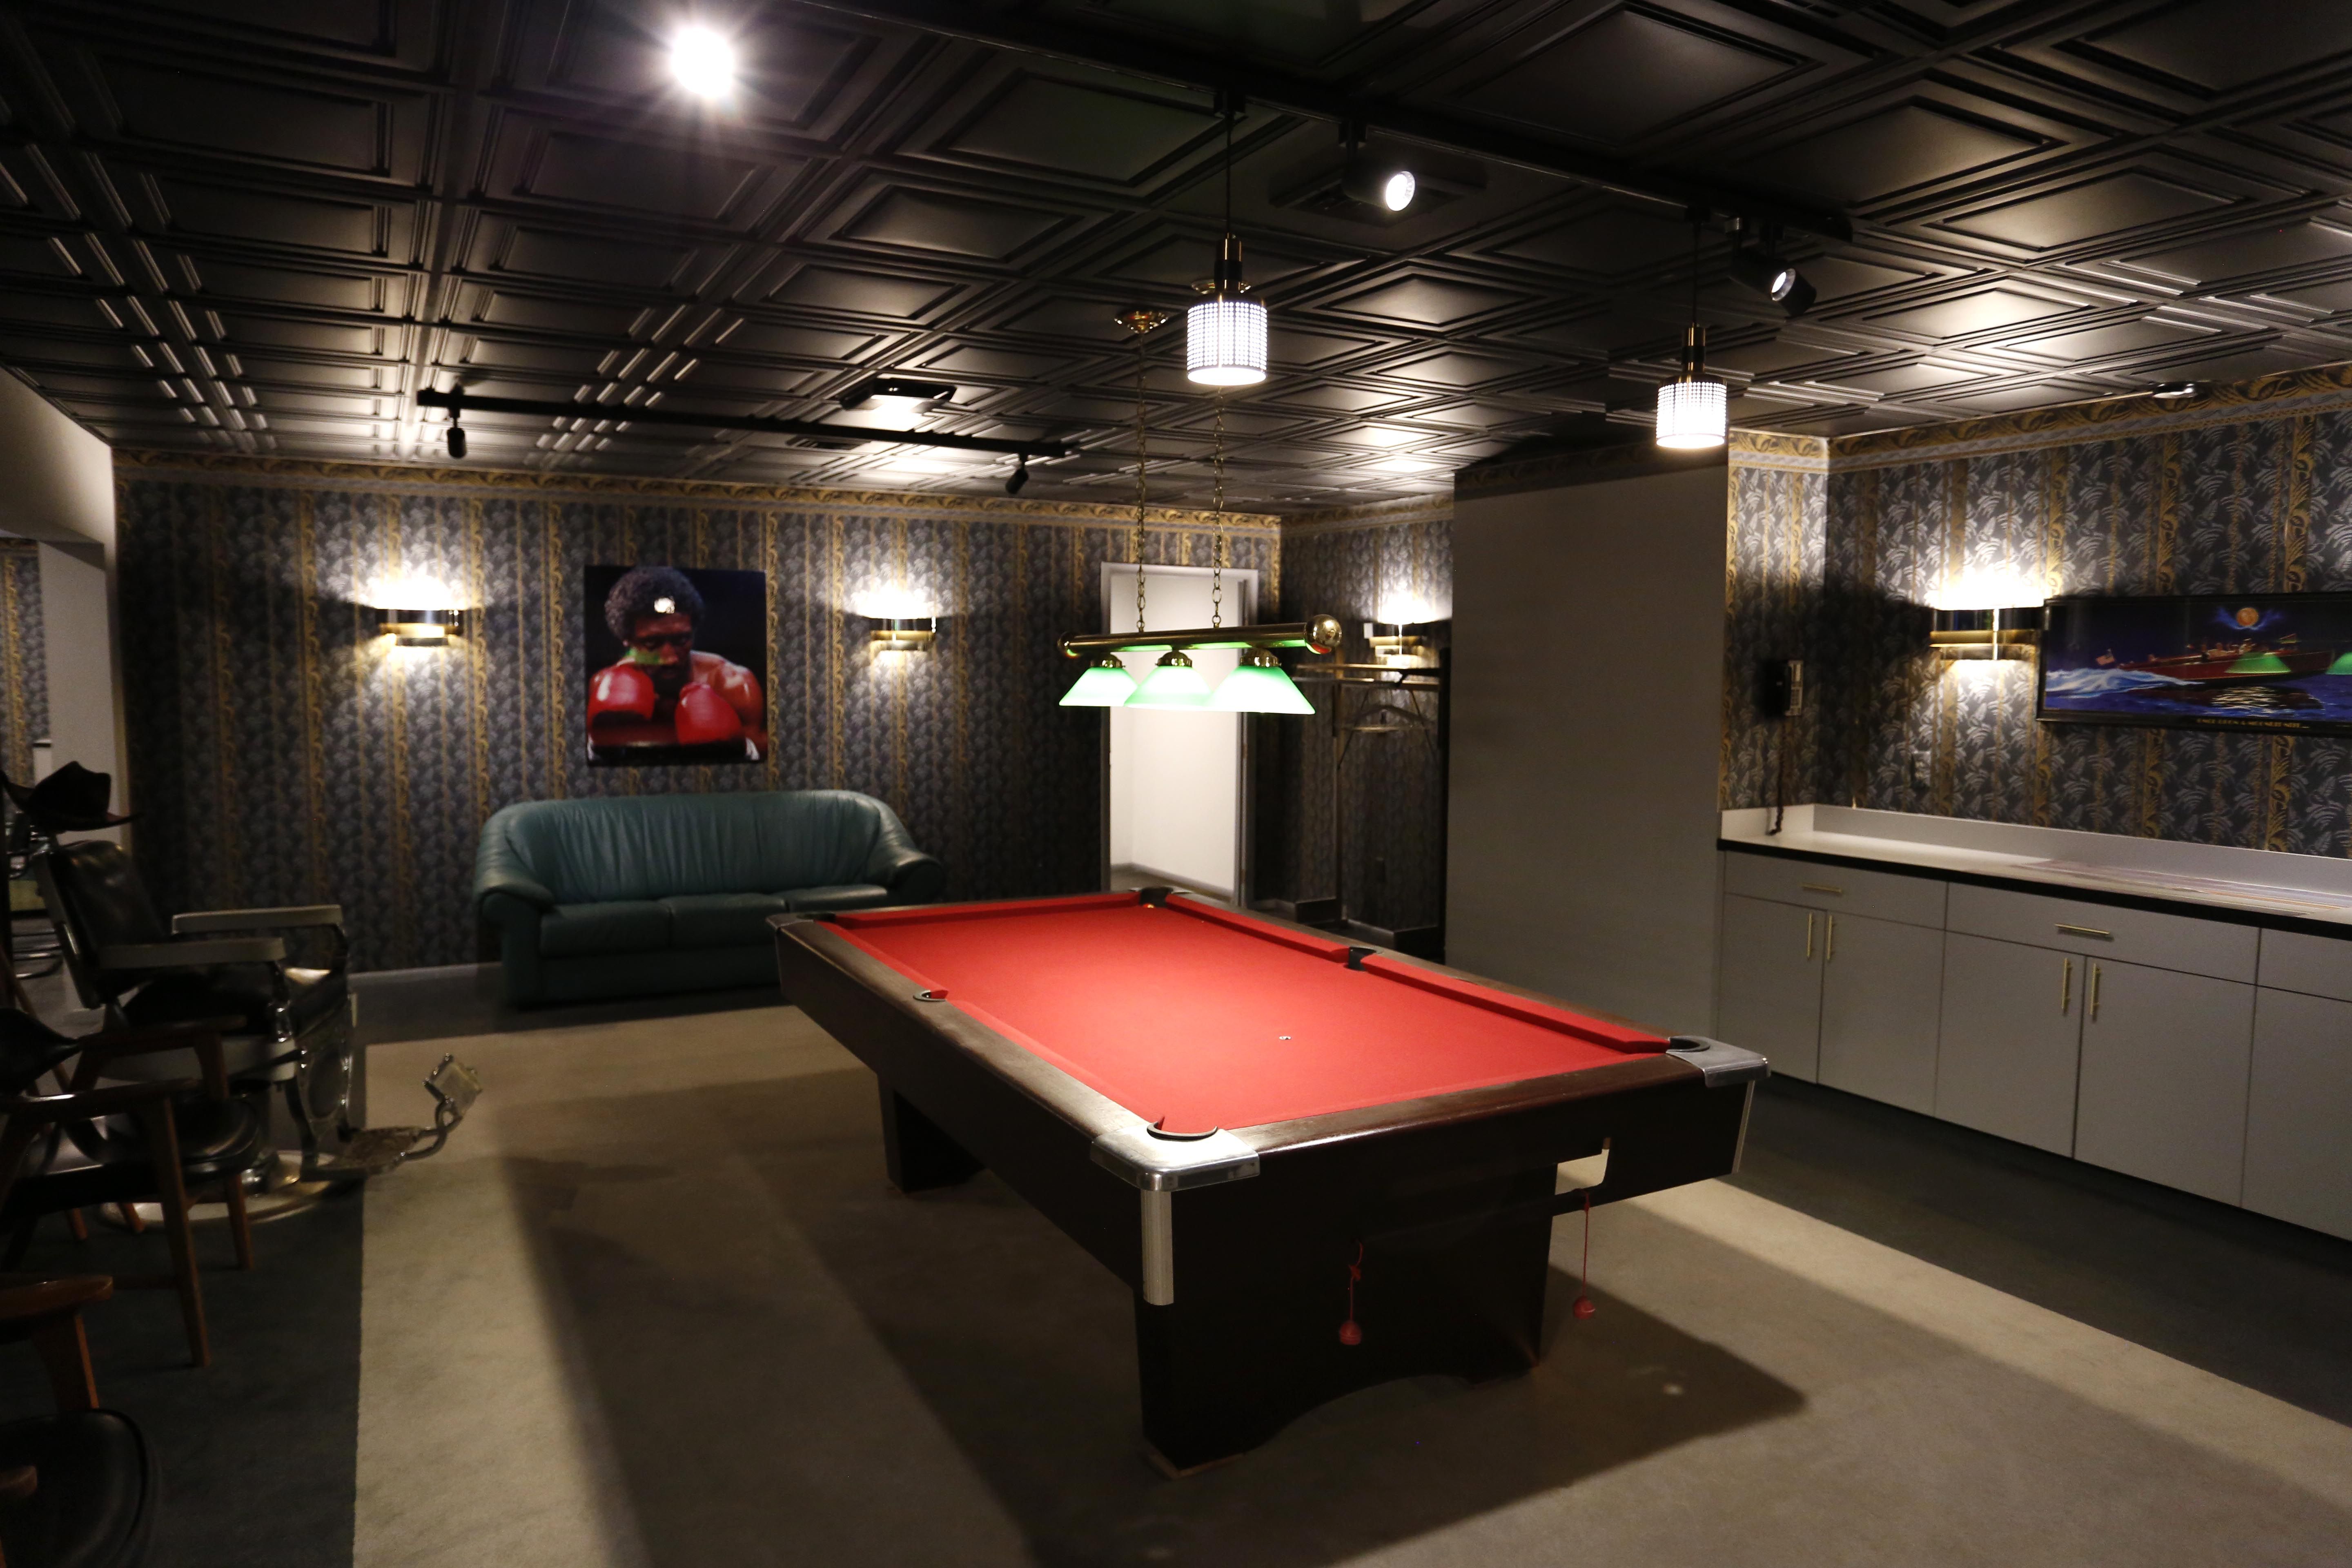 The green room has a pool table and unique wallpaper.